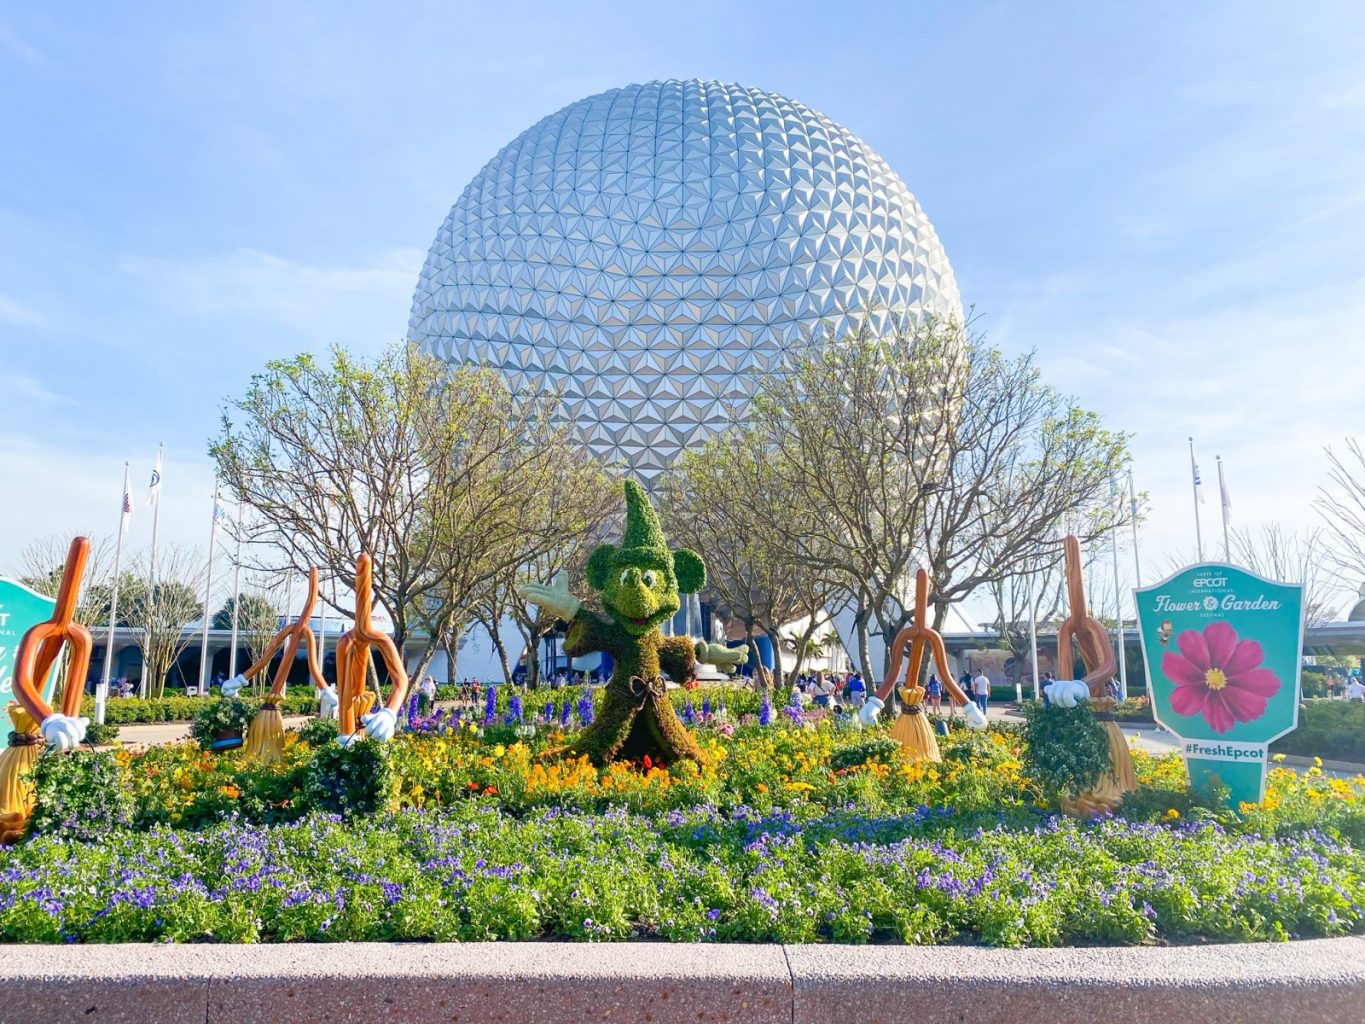 view of the Epcot ball during the flower and garden festival